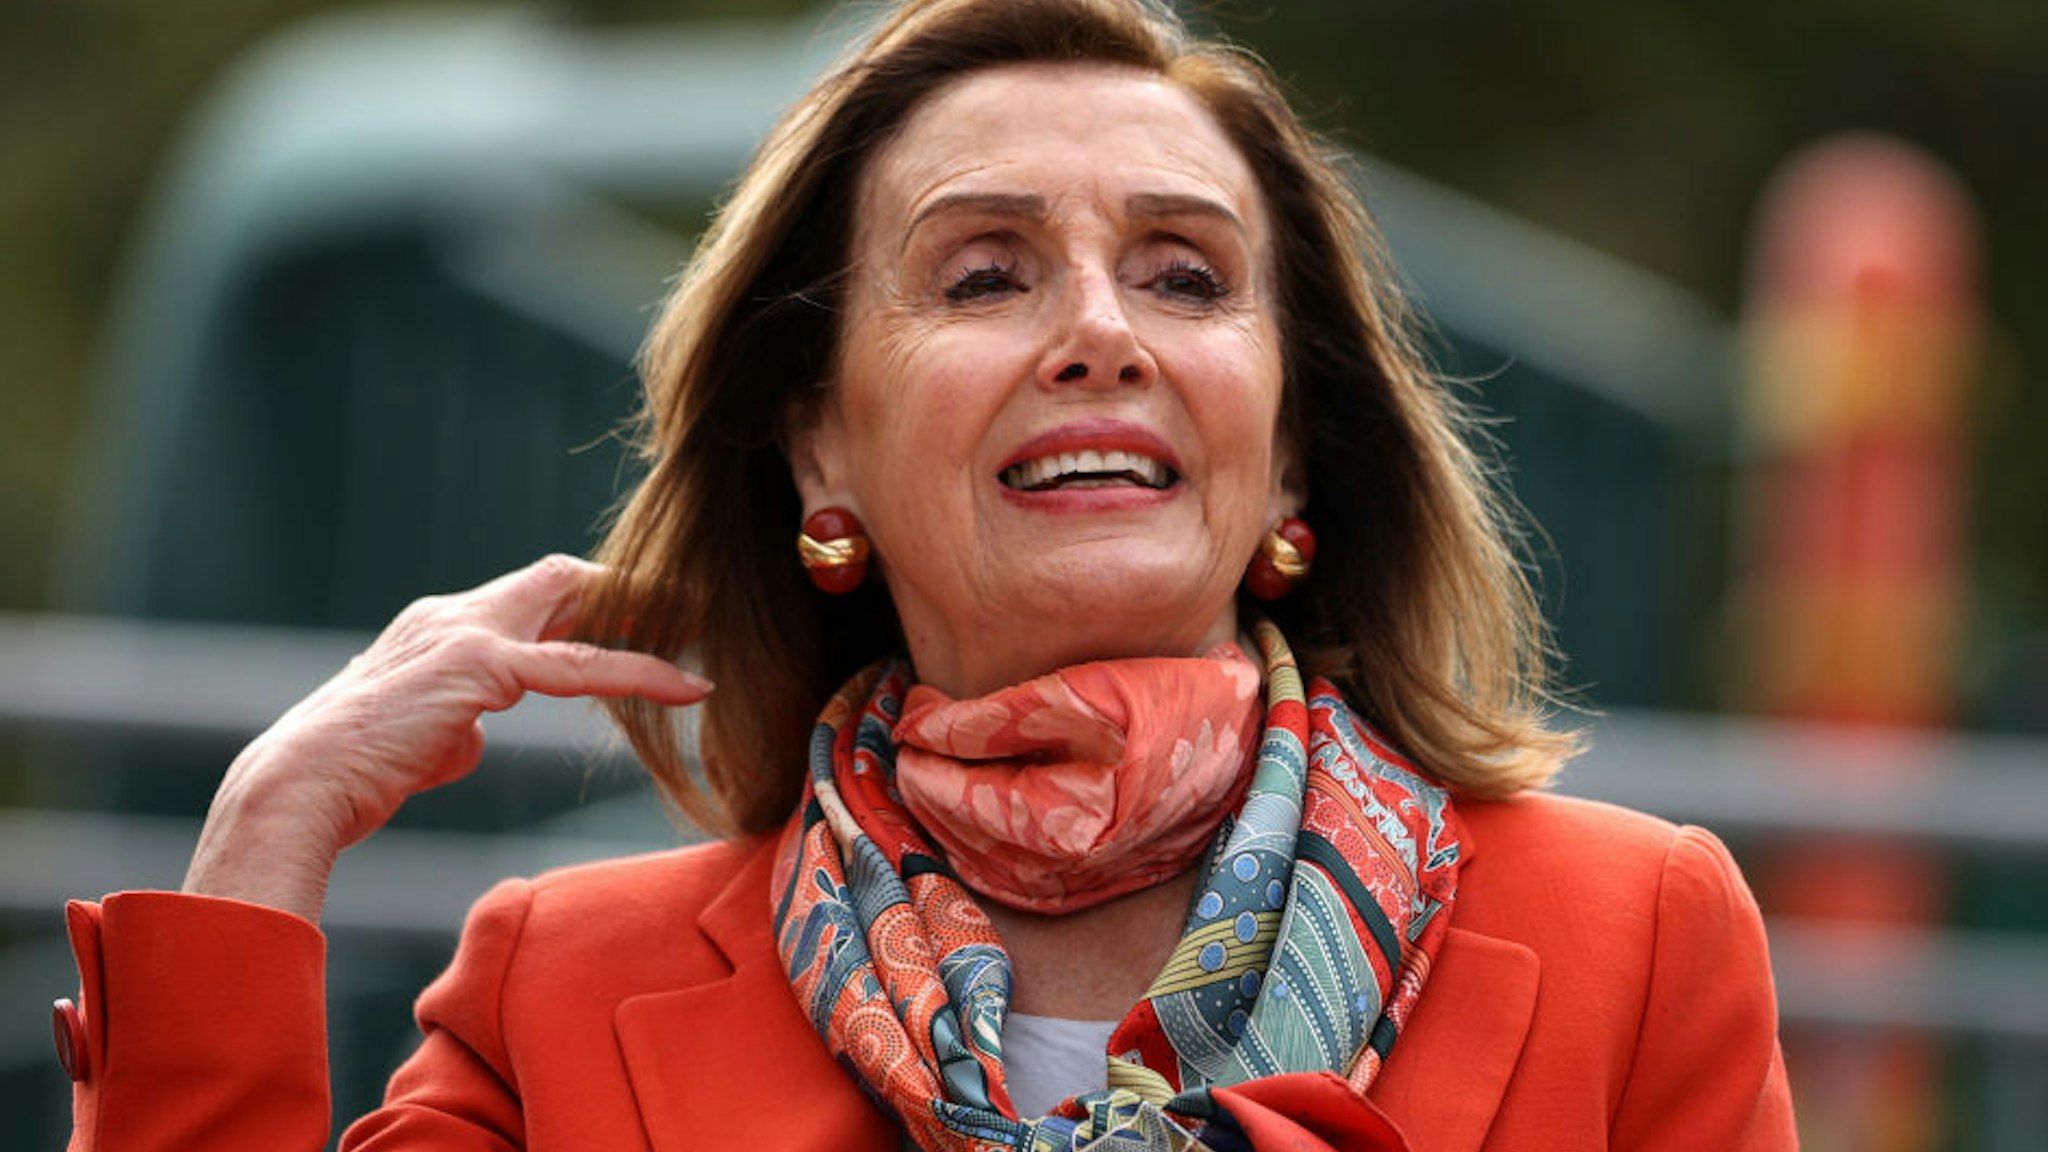 U.S. Speaker of the House Nancy Pelosi (D-CA) adjusts her hair as she speaks during a Day of Action For the Children event at Mission Education Center Elementary School on September 02, 2020 in San Francisco, California.